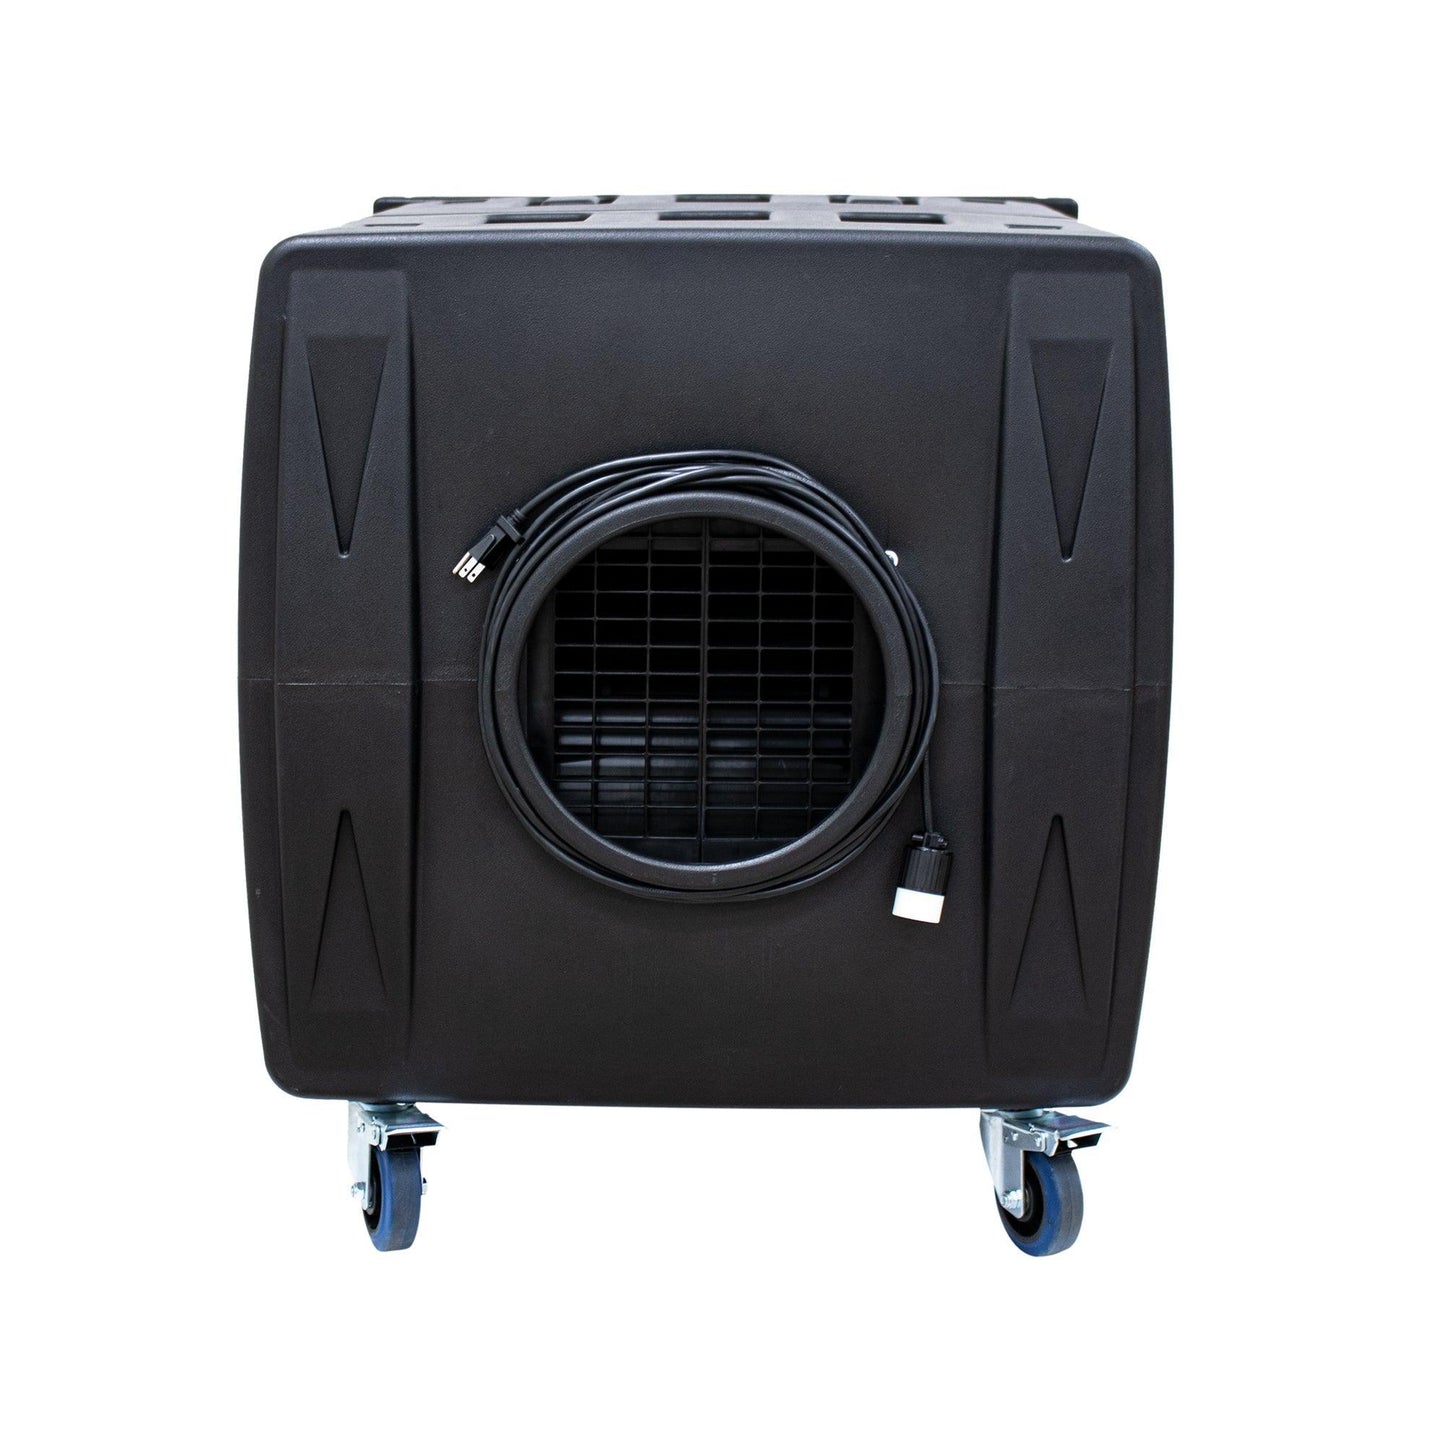 XPOWER AP-2000 Portable 3 Stage Filtration HEPA Air Purifier System - Elite Air Purifiers